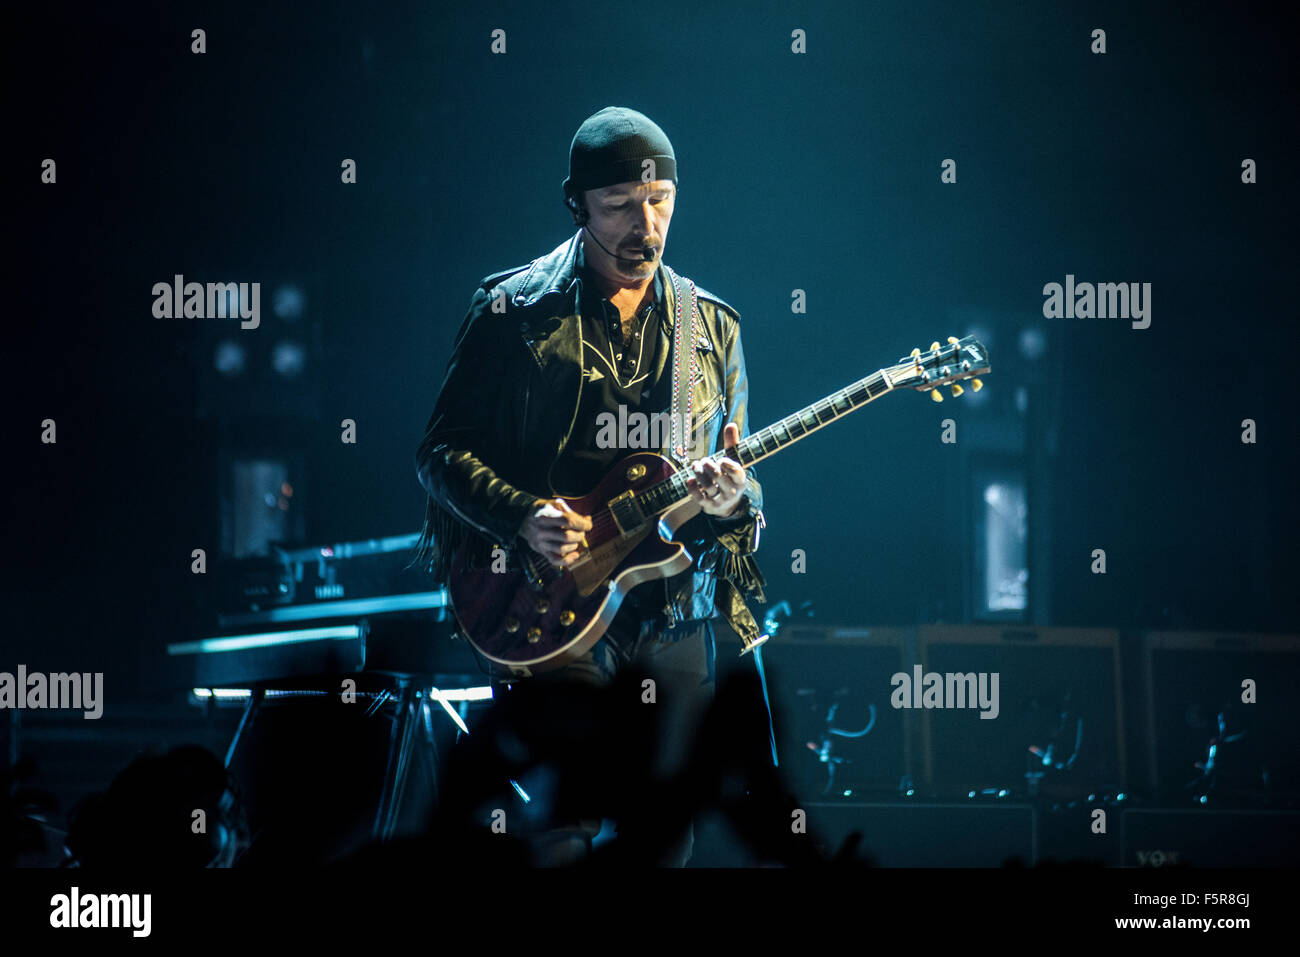 U2 guitarist The Edge on the convergence of art, music, and technology at  The Sphere in Las Vegas